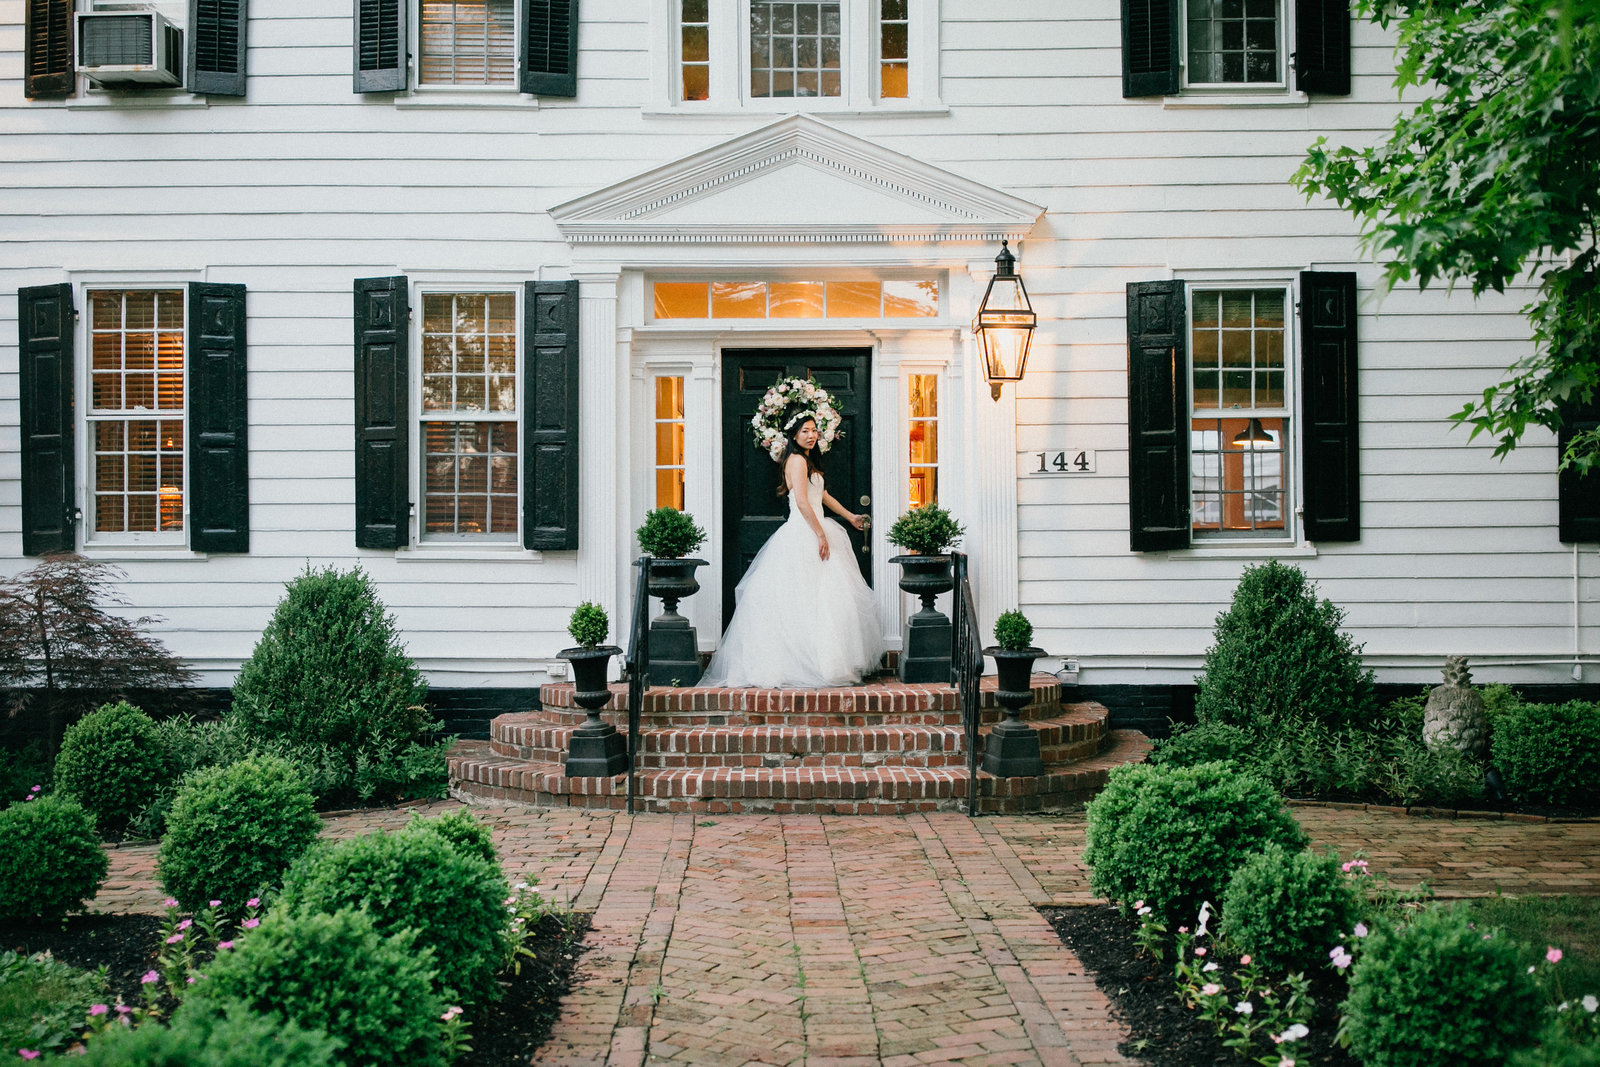 Bride showing off her gorgeous gown, in front of the historic Inn at Fernbrook Farm.